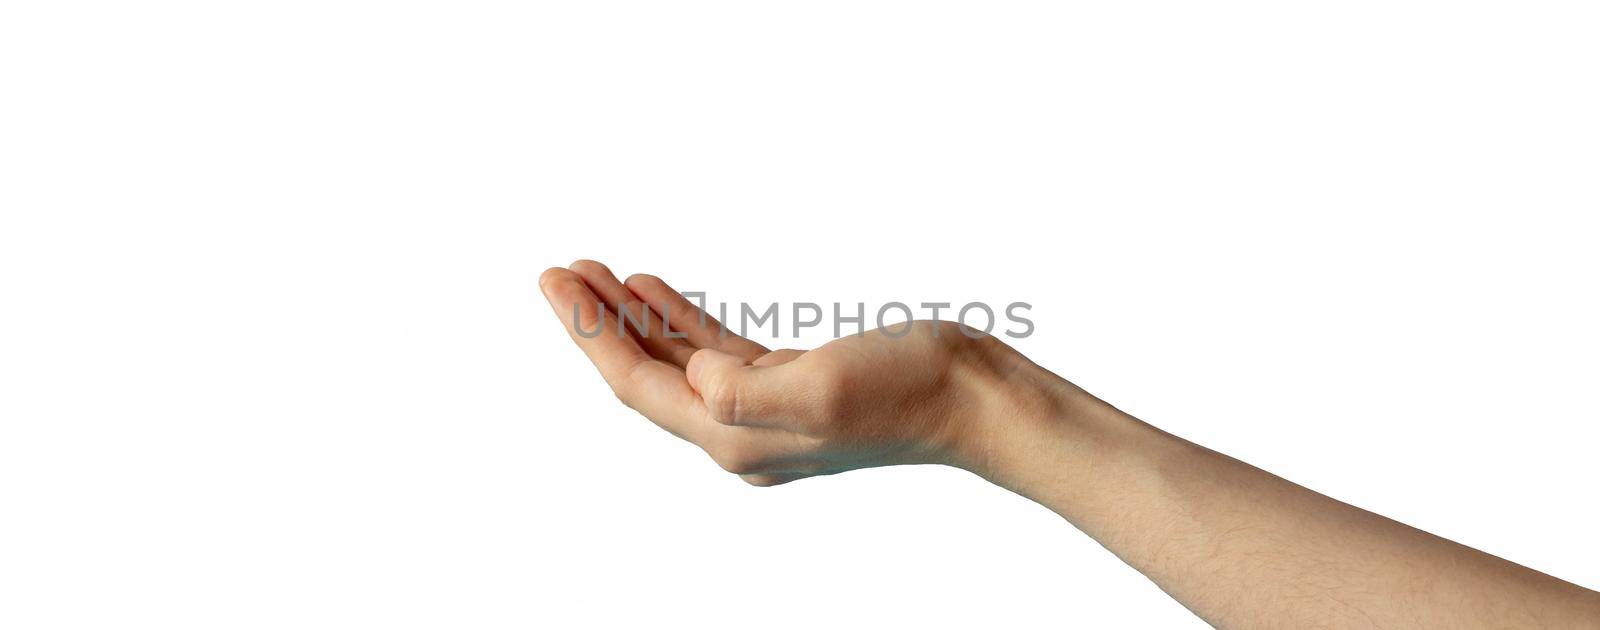 A hand extended palm up.The hand is open and ready to help or accept. A gesture highlighted on a white background with a clipping outline by lapushka62